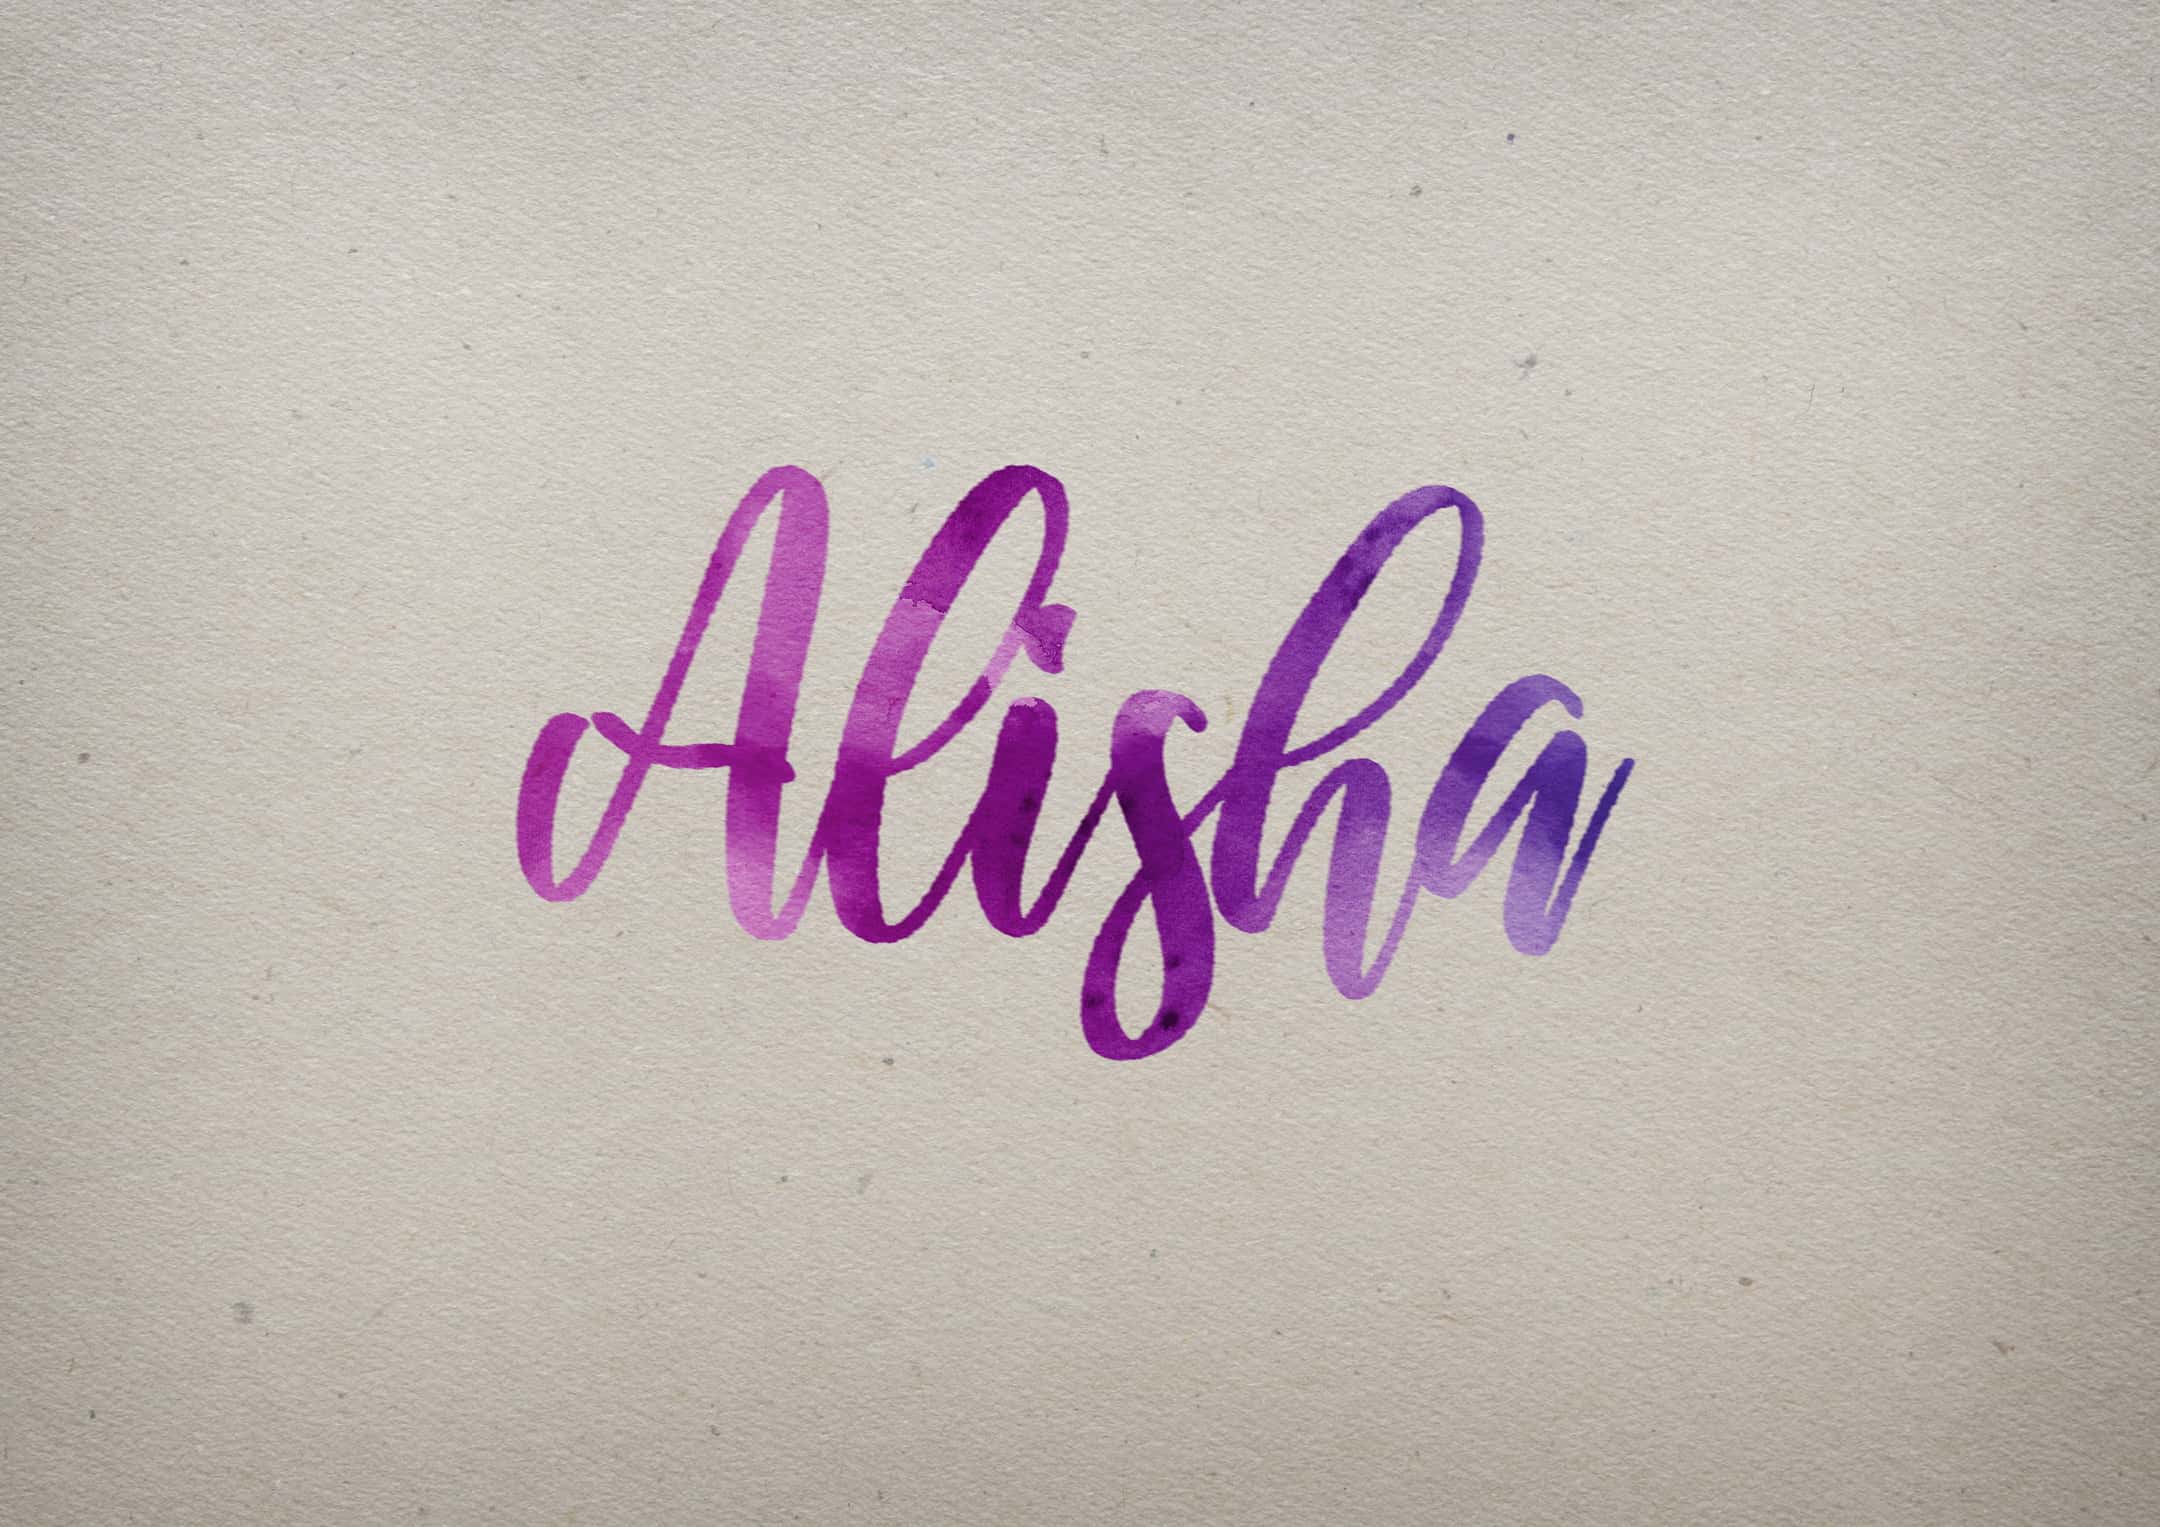 Alisha khan | Name wallpaper, Love quotes with images, Creative lettering